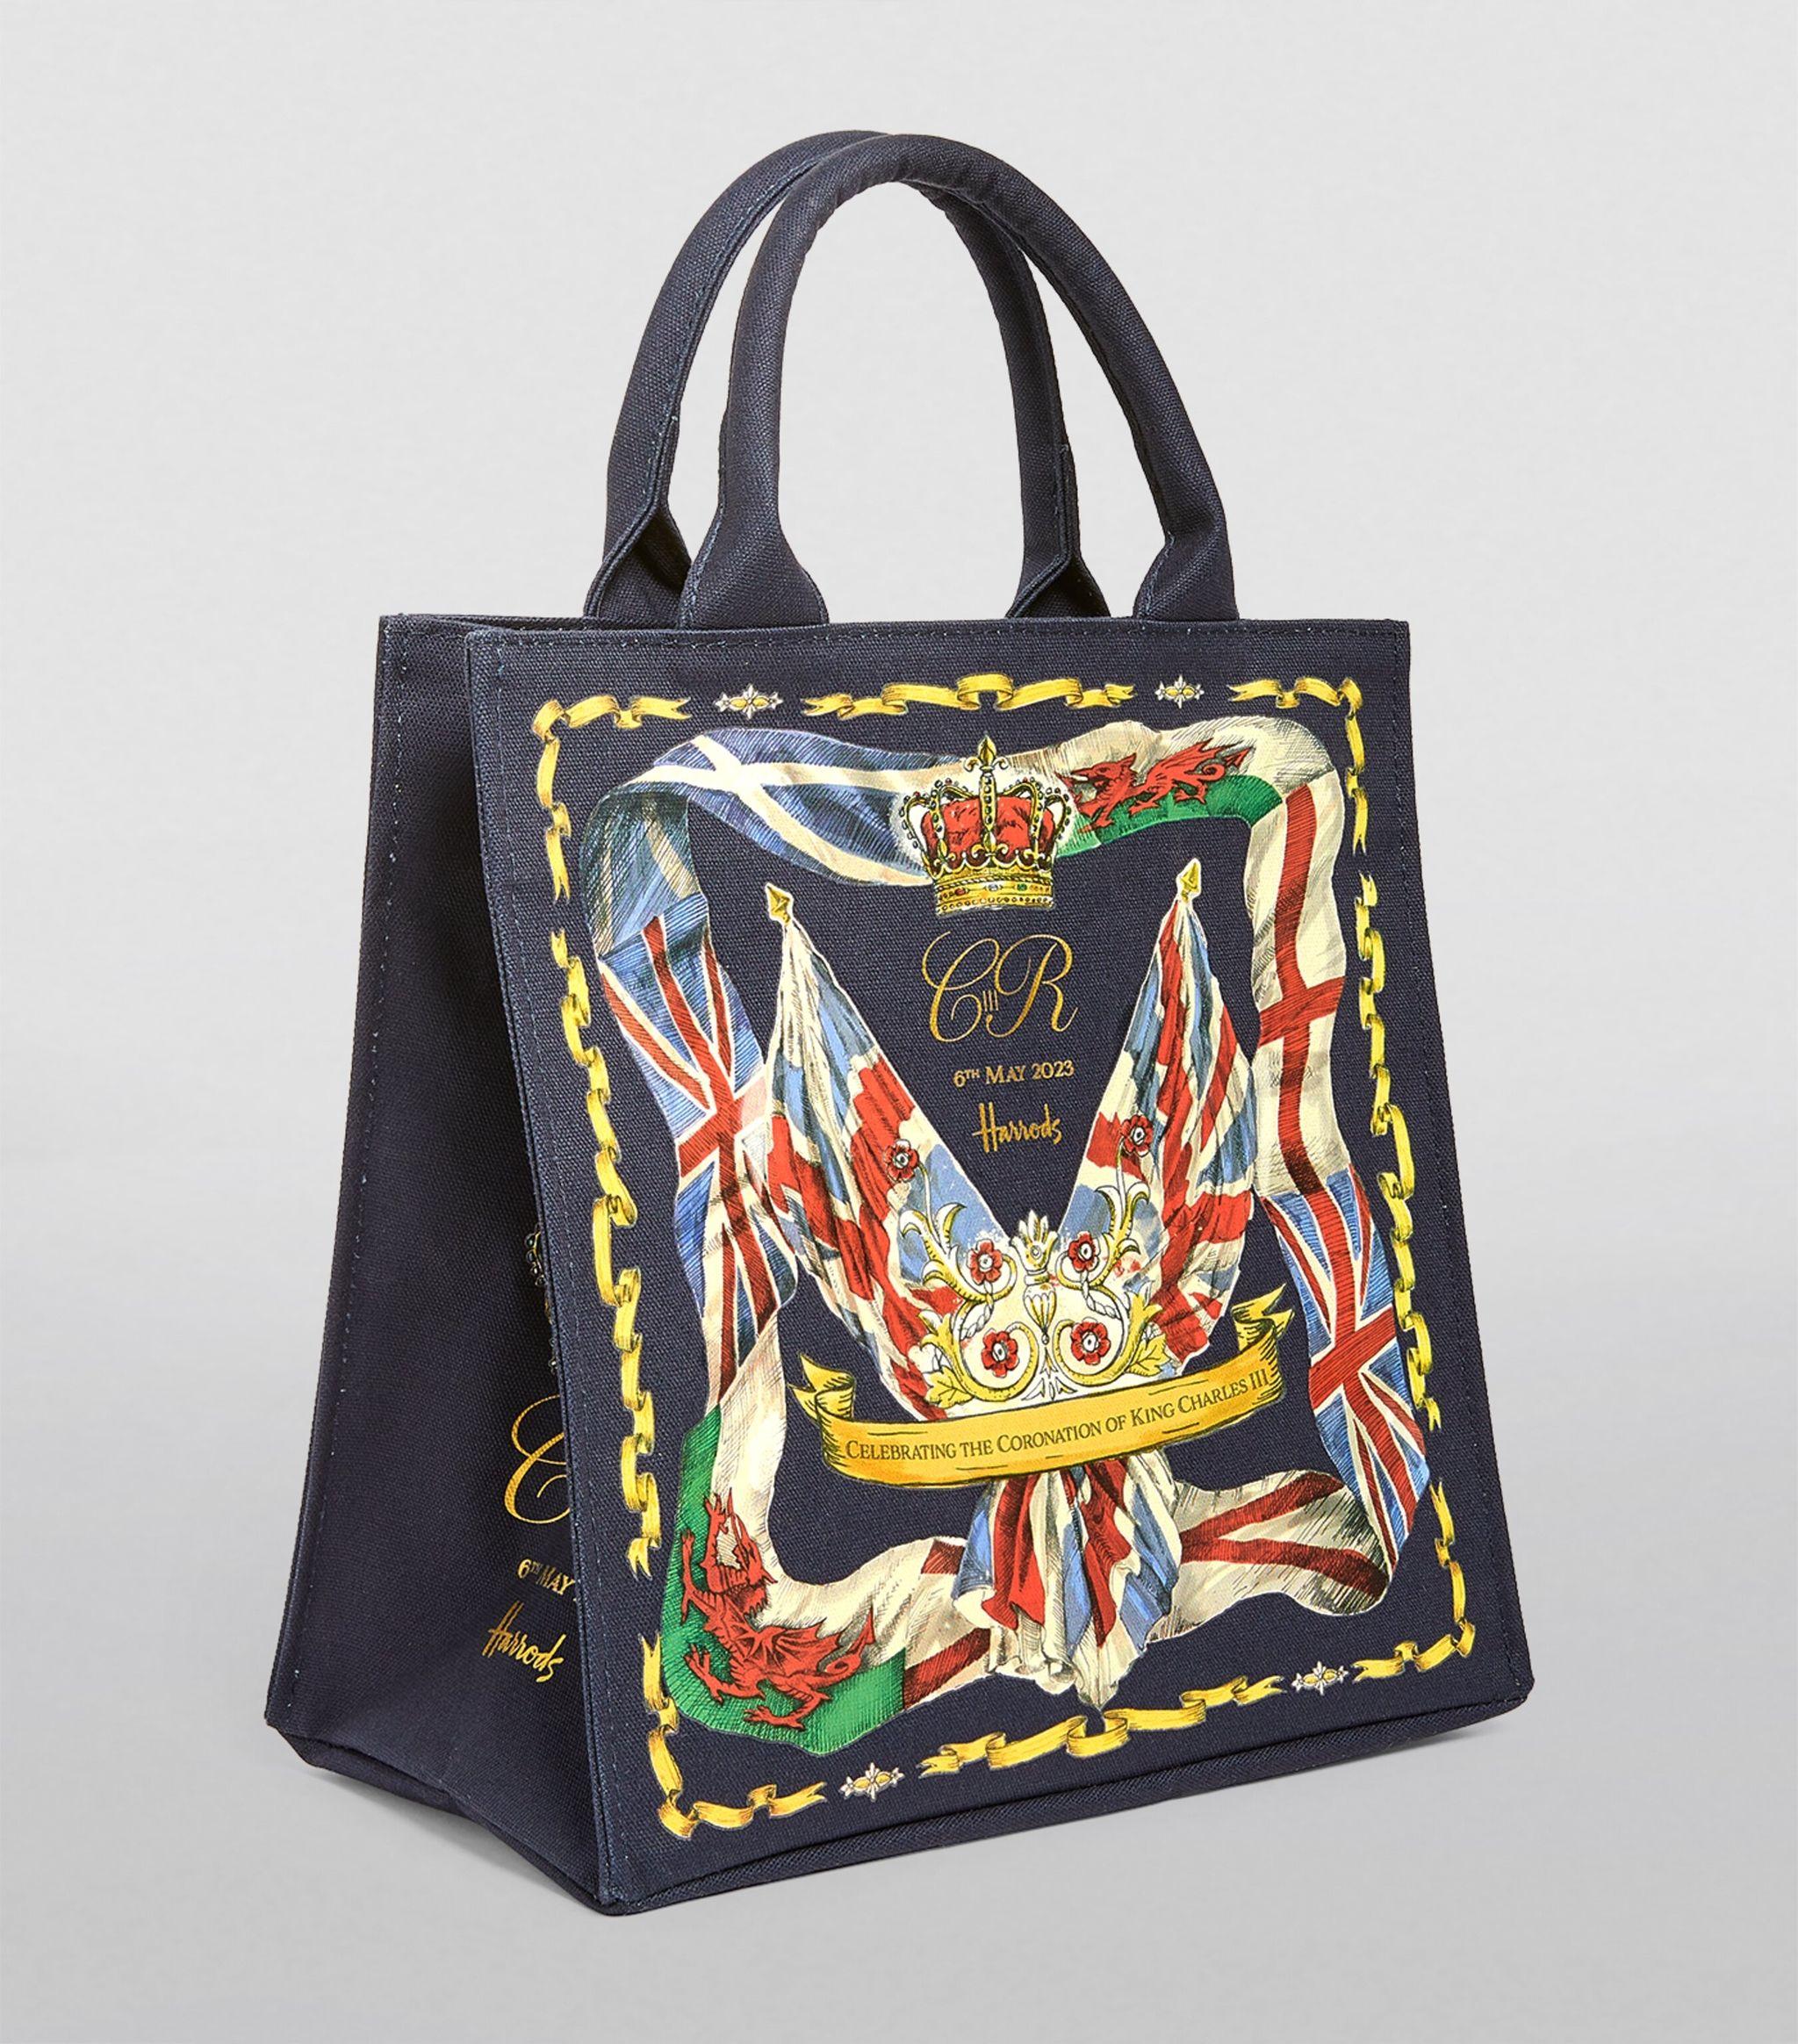 Harrods Small King's Coronation Tote Bag in Black | Lyst